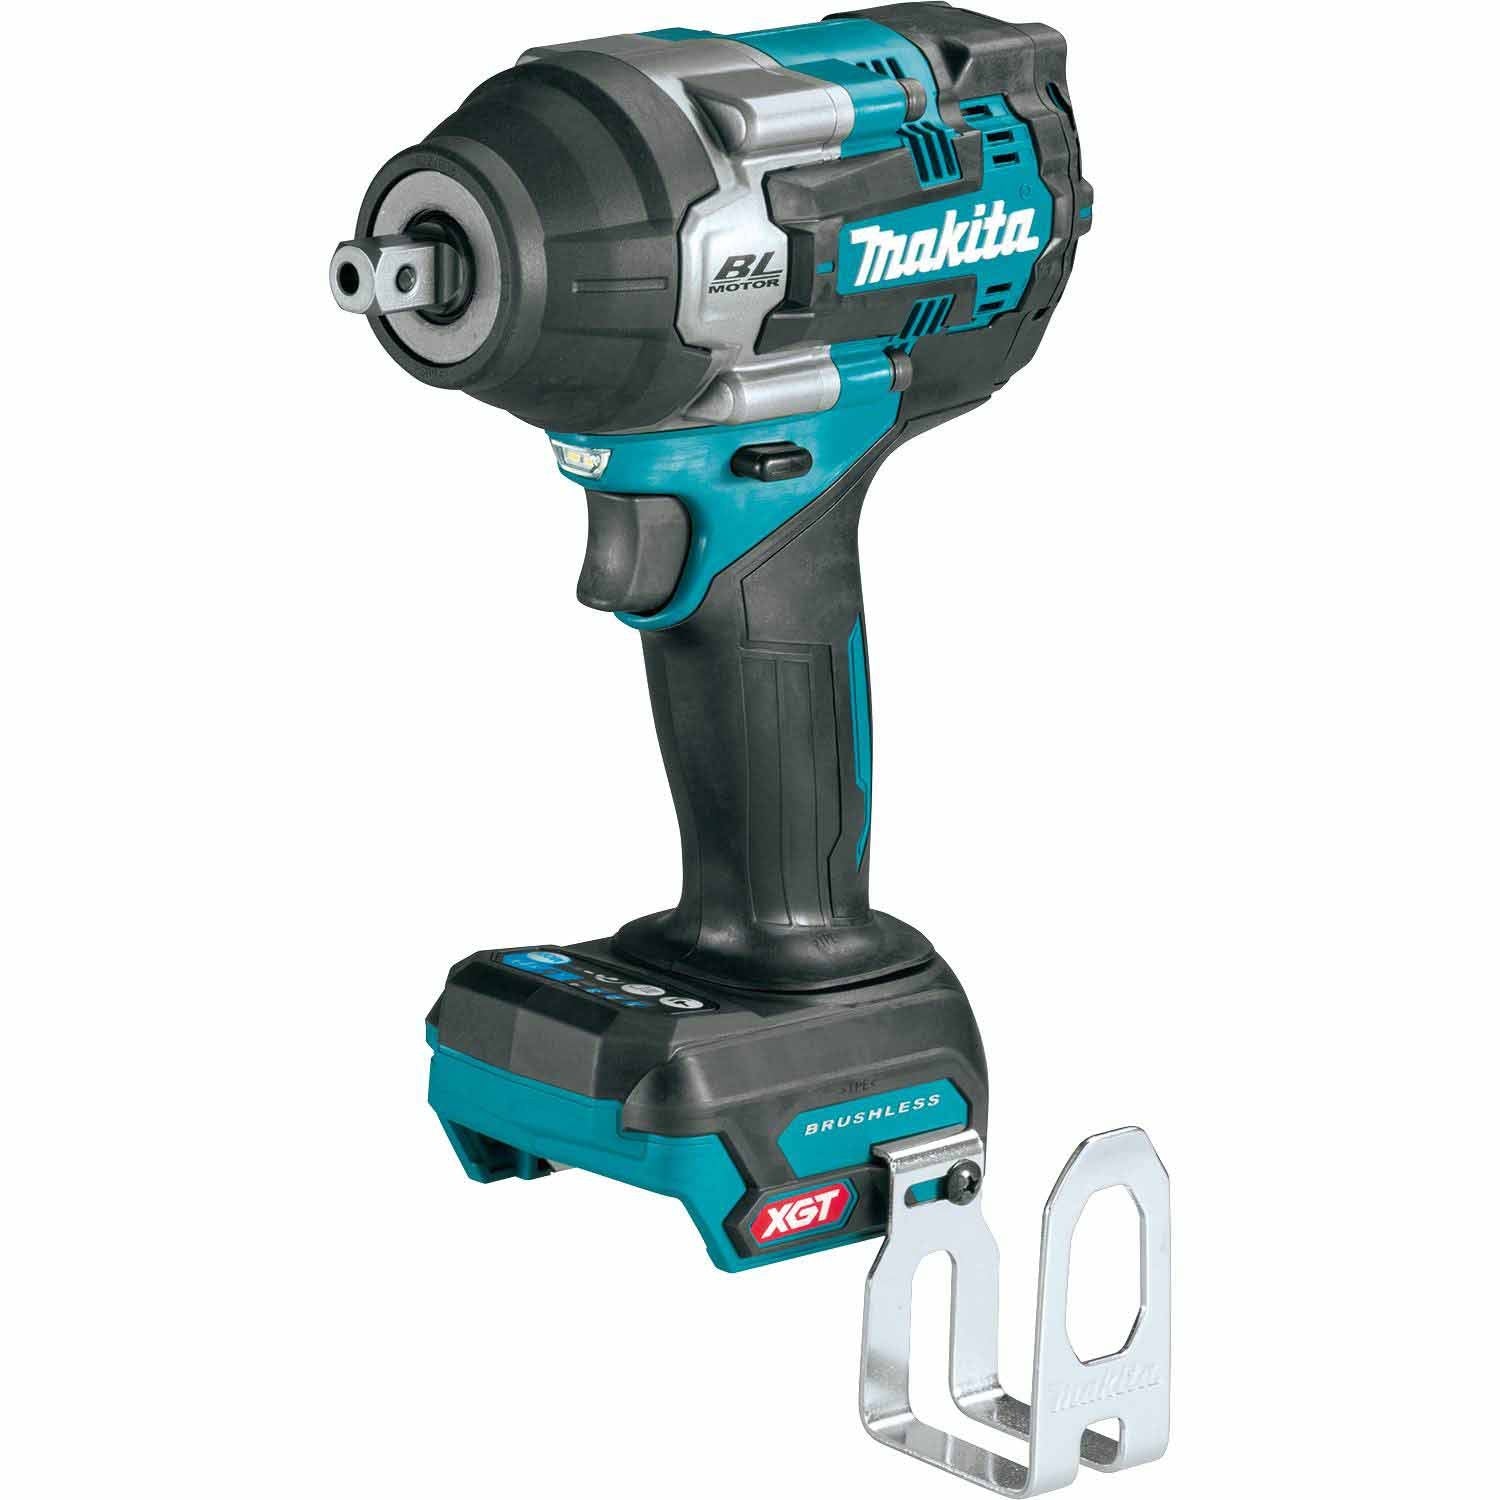 Makita GWT08Z 40V MAX XGT 1/2" Sq. Drive Impact Wrench, Tool Only